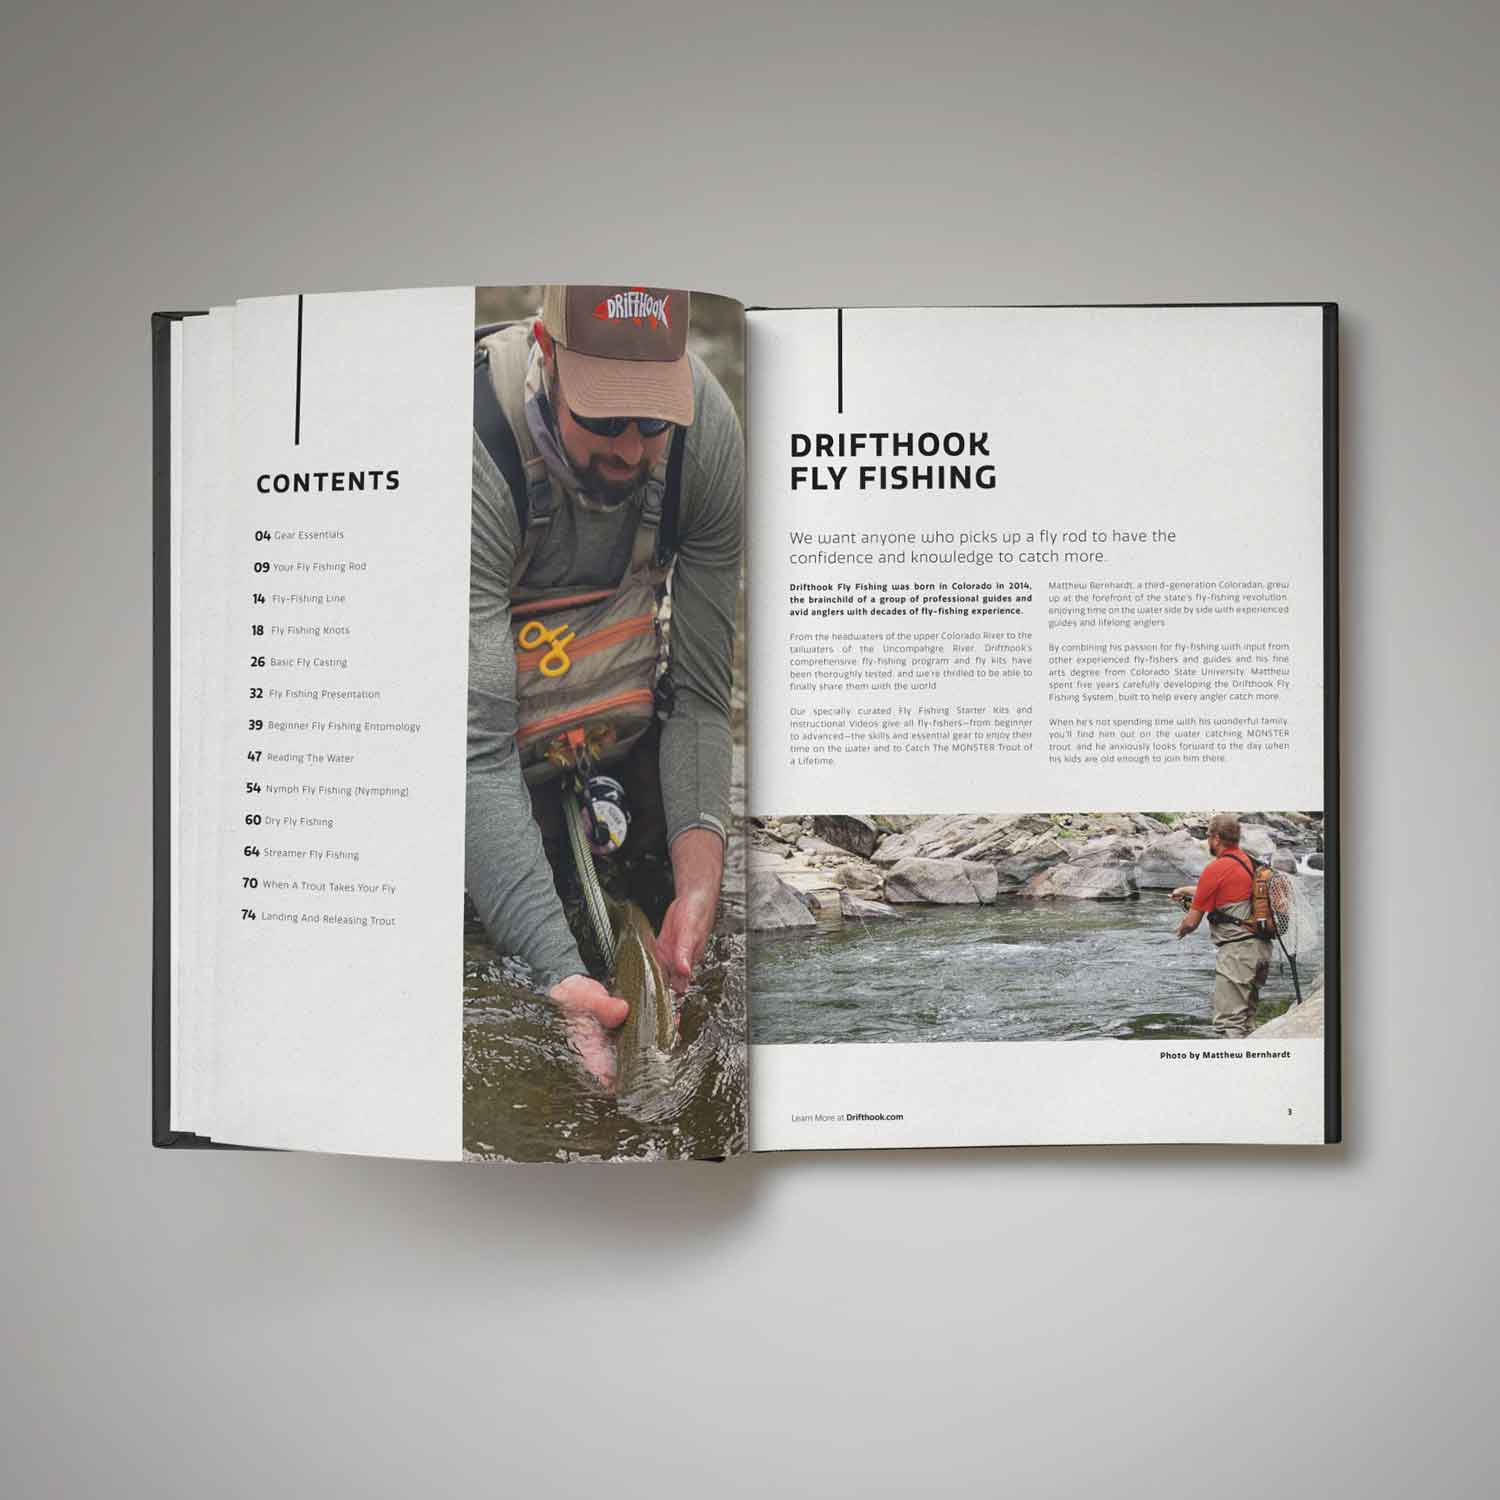 Beginners Guid to Fly Fishing Ebook Inside Pages